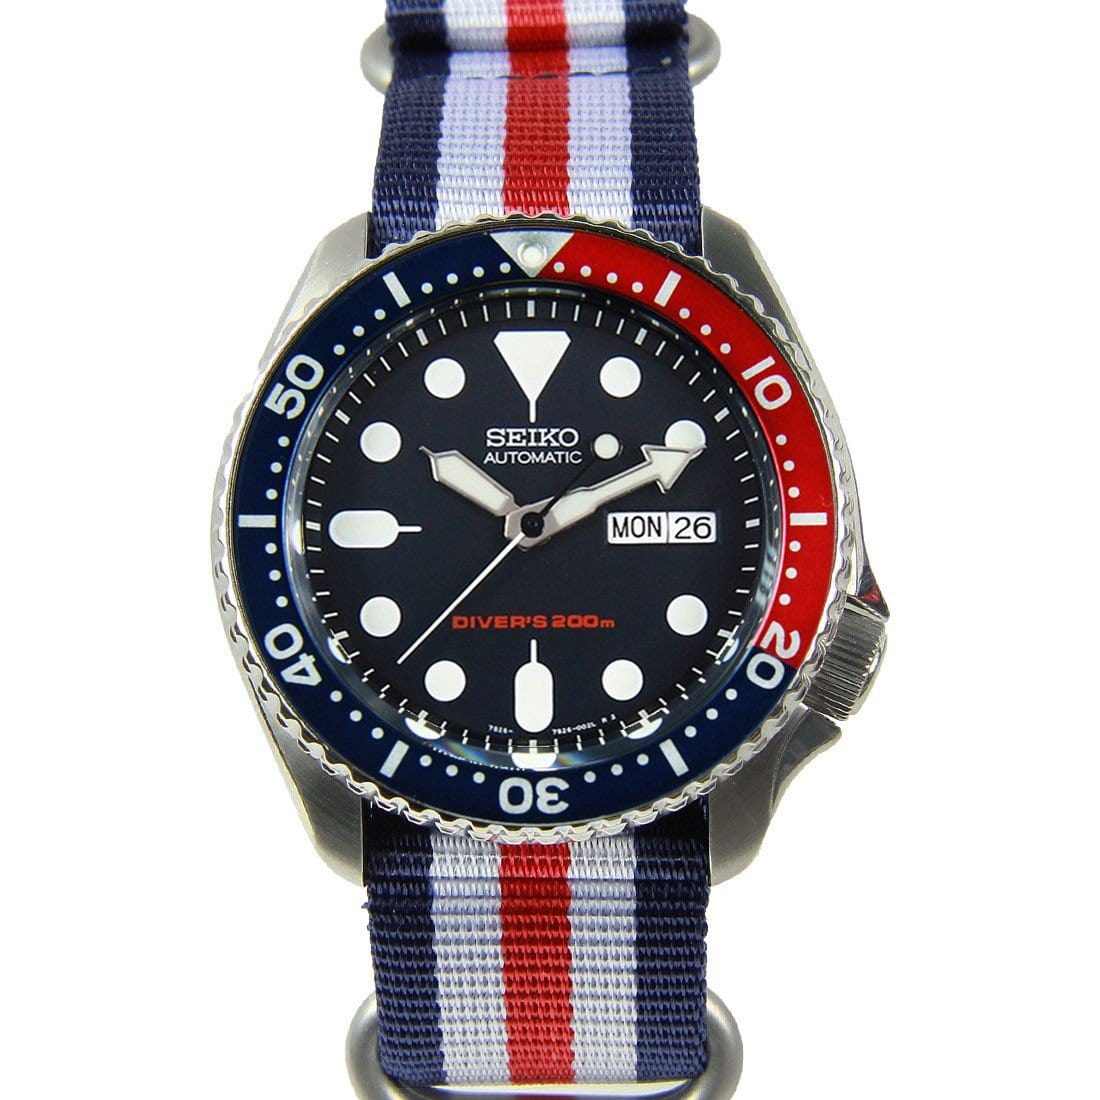 SKX009K1 SKX009K Seiko Automatic Day Date Male Divers Watch with Extra Strap